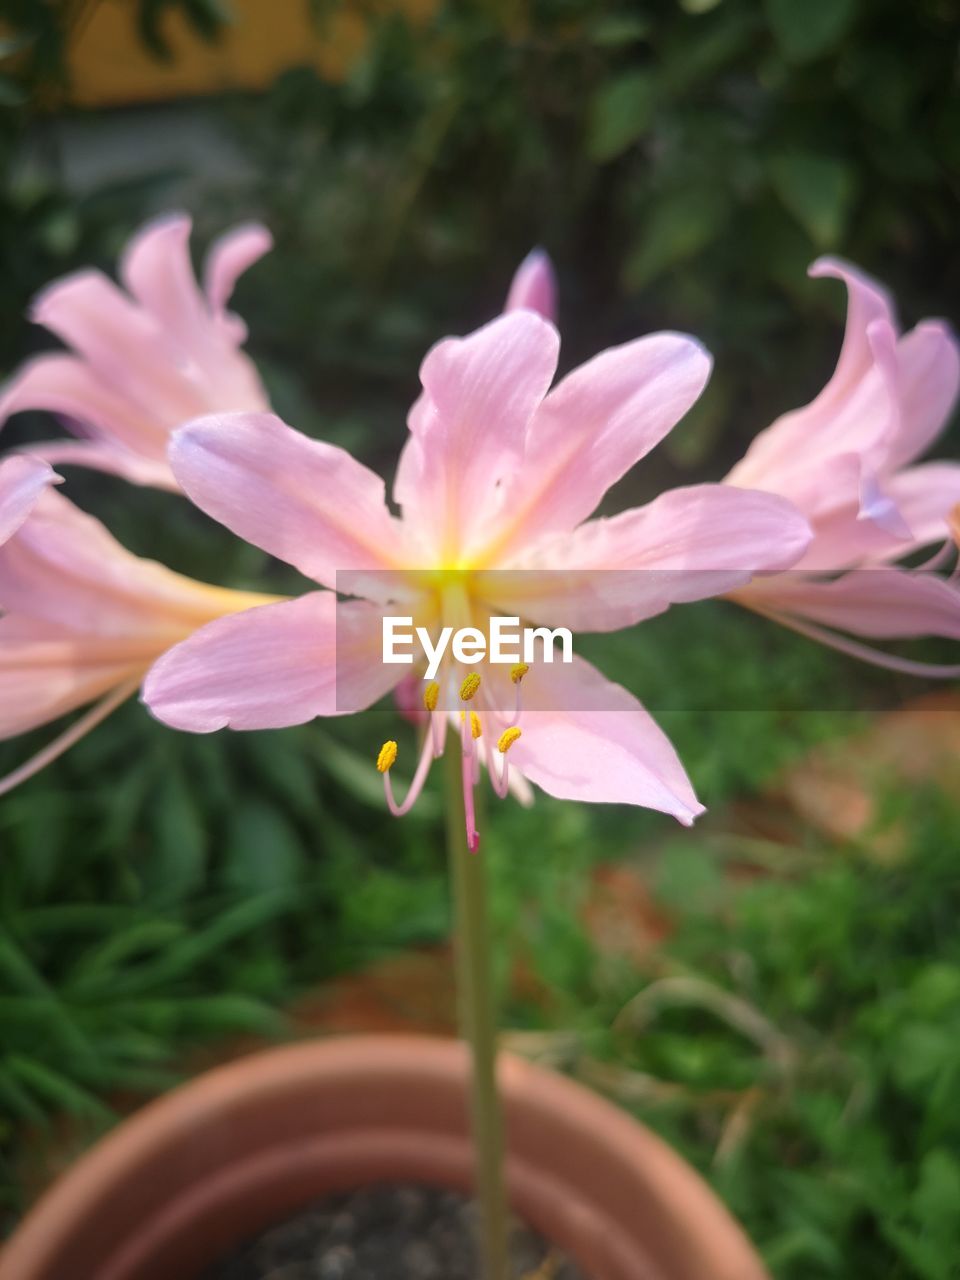 flower, flowering plant, plant, freshness, beauty in nature, fragility, petal, growth, close-up, flower head, nature, inflorescence, pink, focus on foreground, blossom, no people, pollen, lily, outdoors, botany, springtime, stamen, day, selective focus